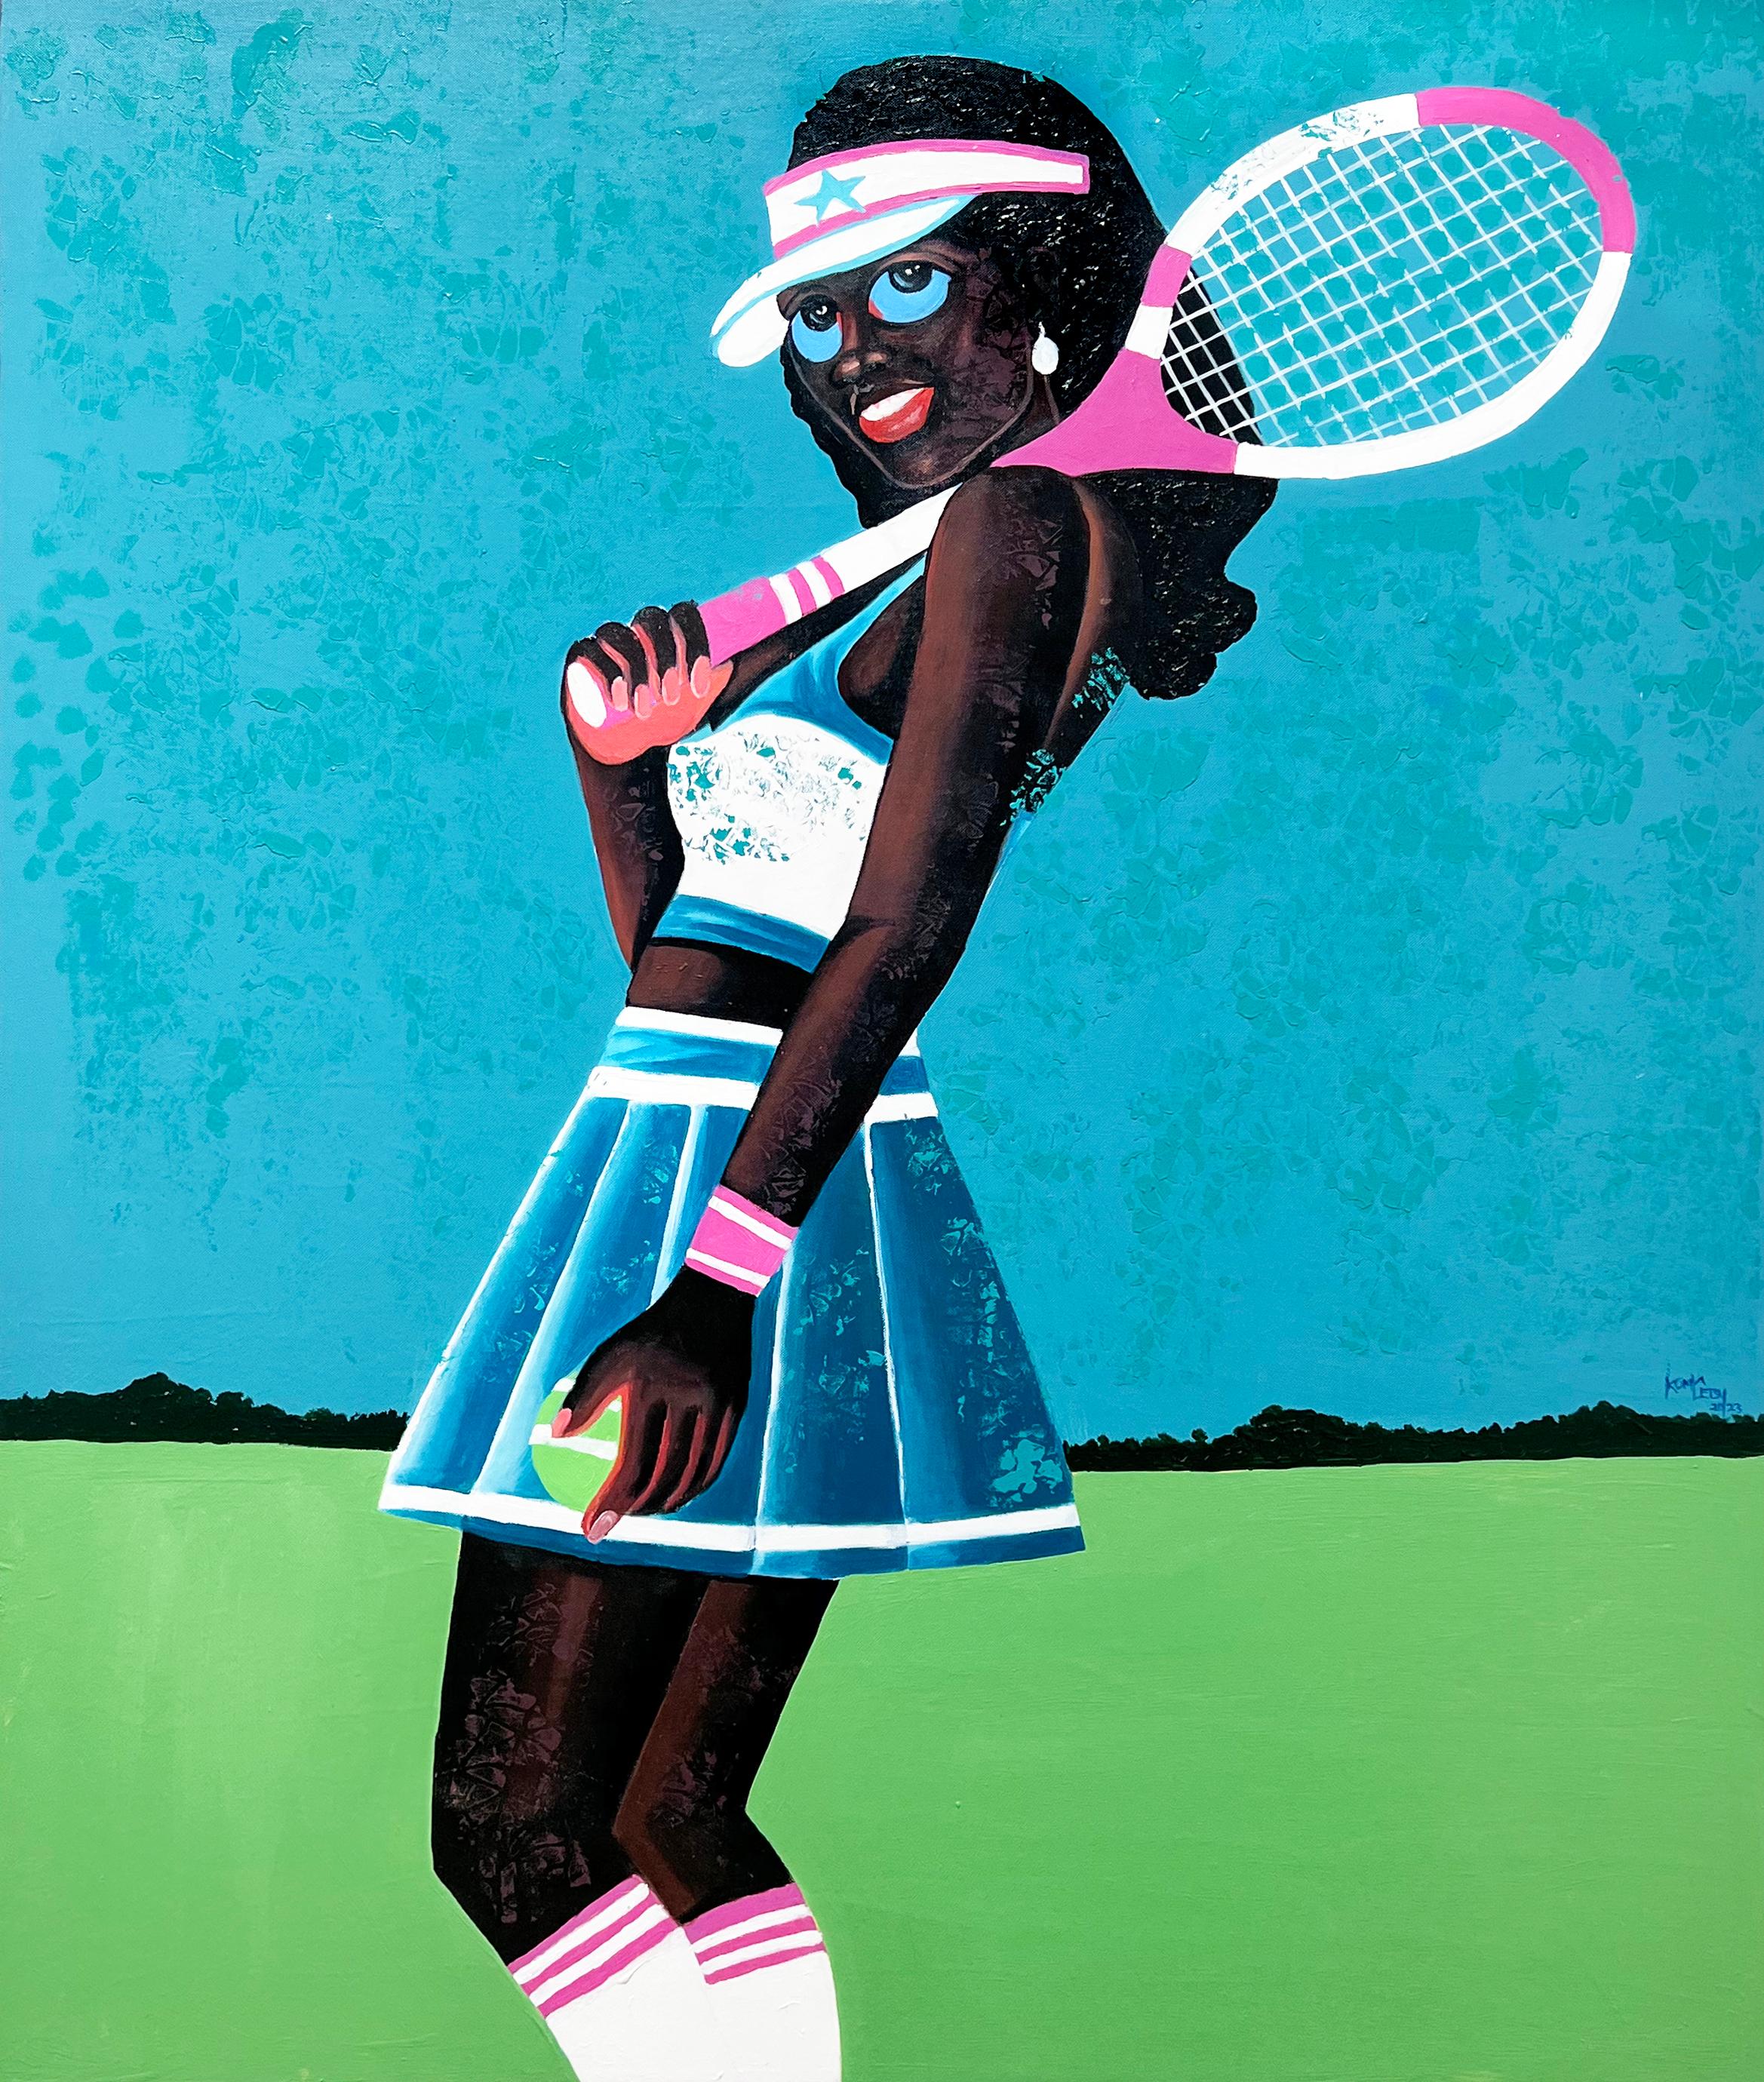 Philip Letsu - "Pose With My Racket" - Colourful Figurative Painting by  Ghanaian Philip Letsu For Sale at 1stDibs